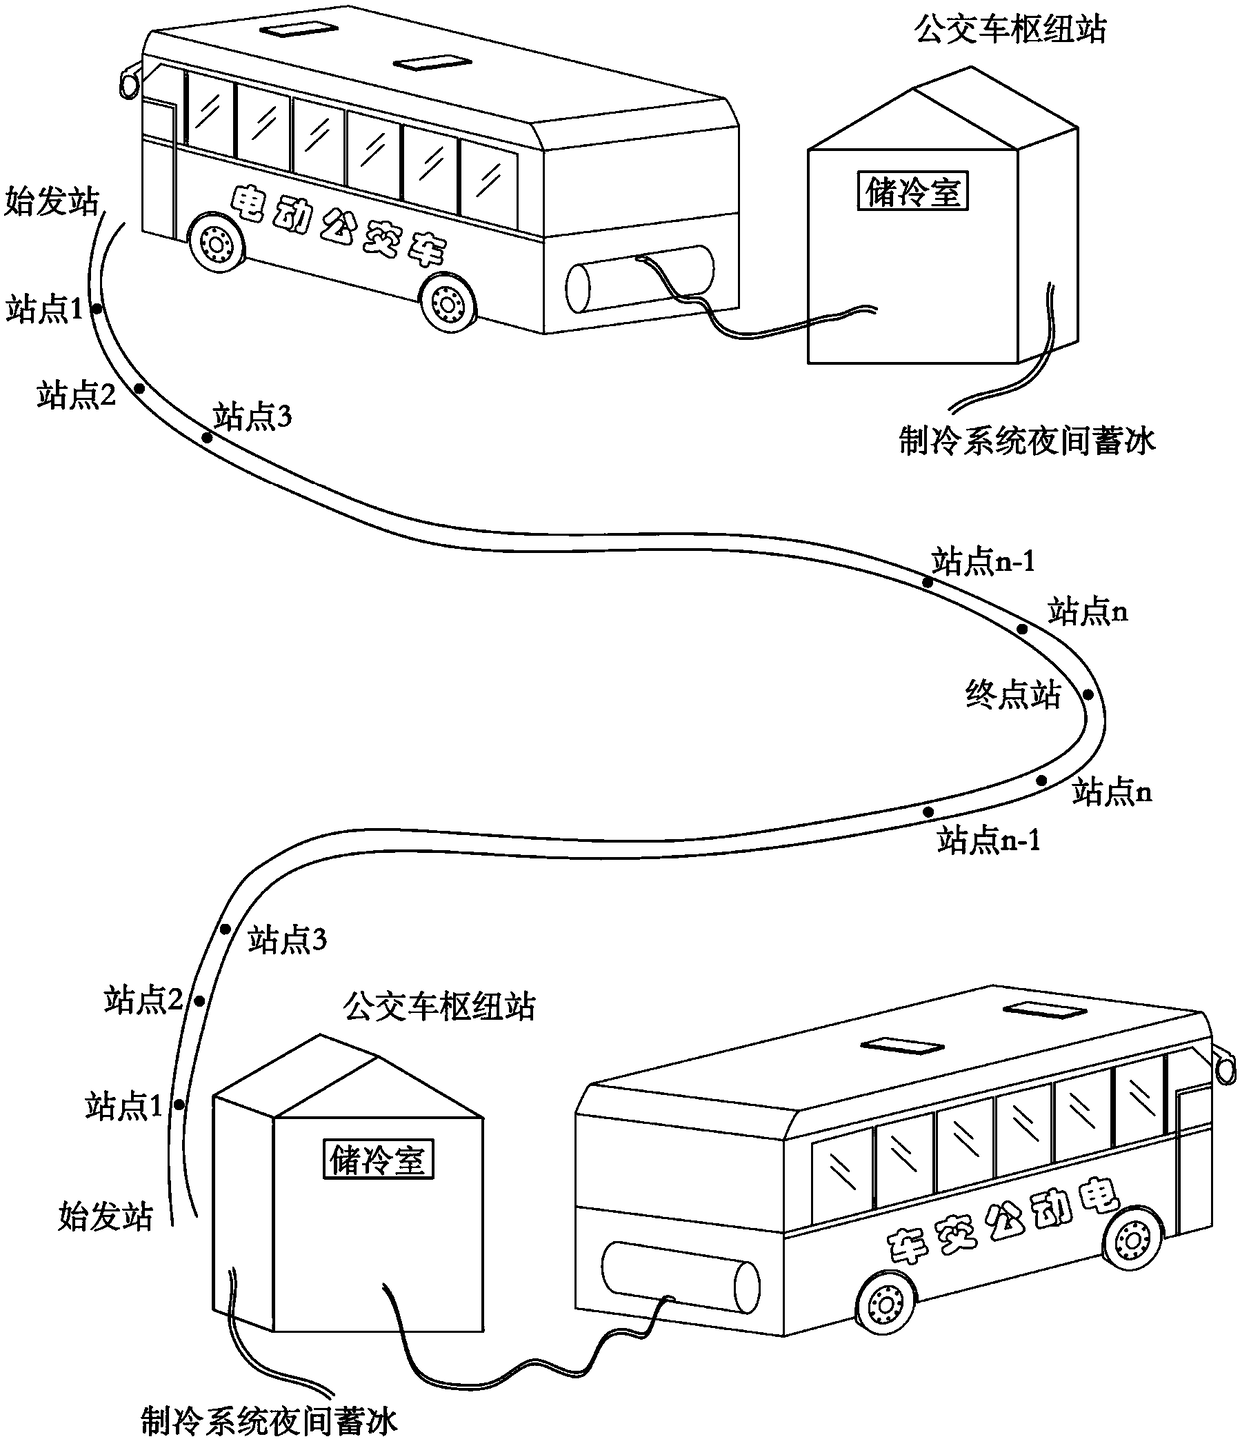 A radiant air-conditioning system for electric buses with phase-change energy storage